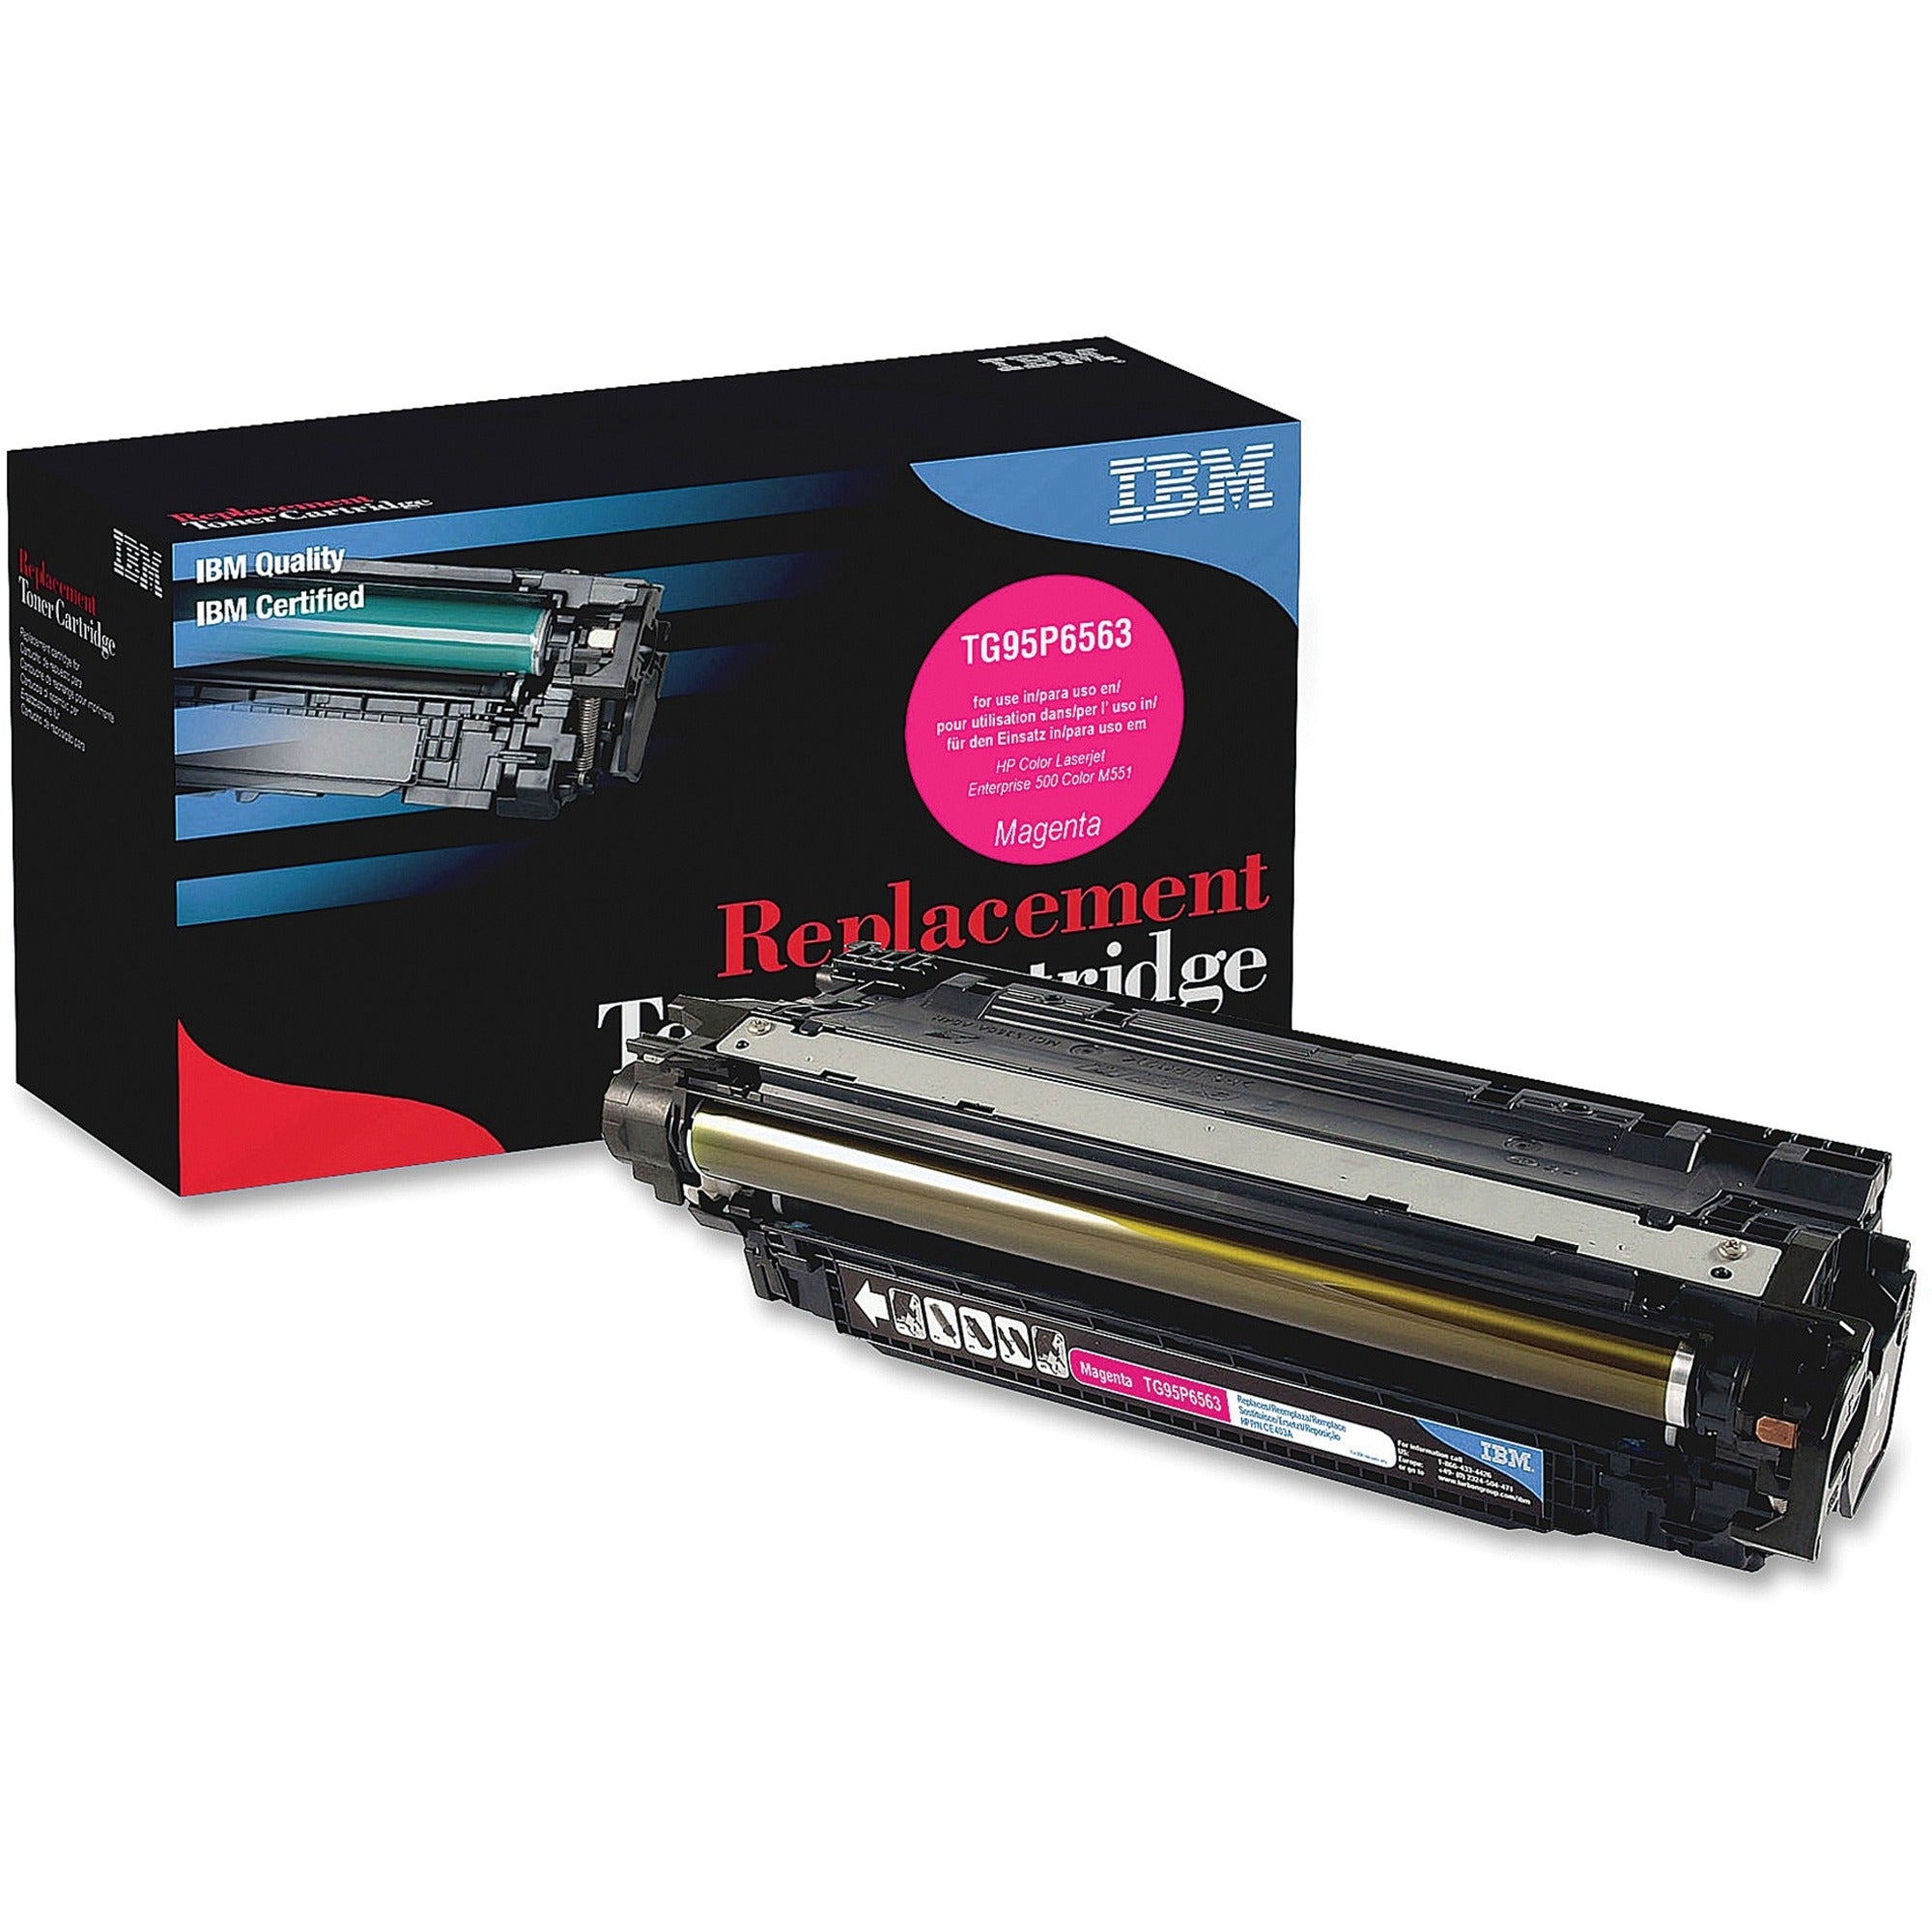 IBM Remanufactured Laser Toner Cartridge - Alternative for HP 507A (CE403A) - Magenta - 1 Each - 6000 Pages - 